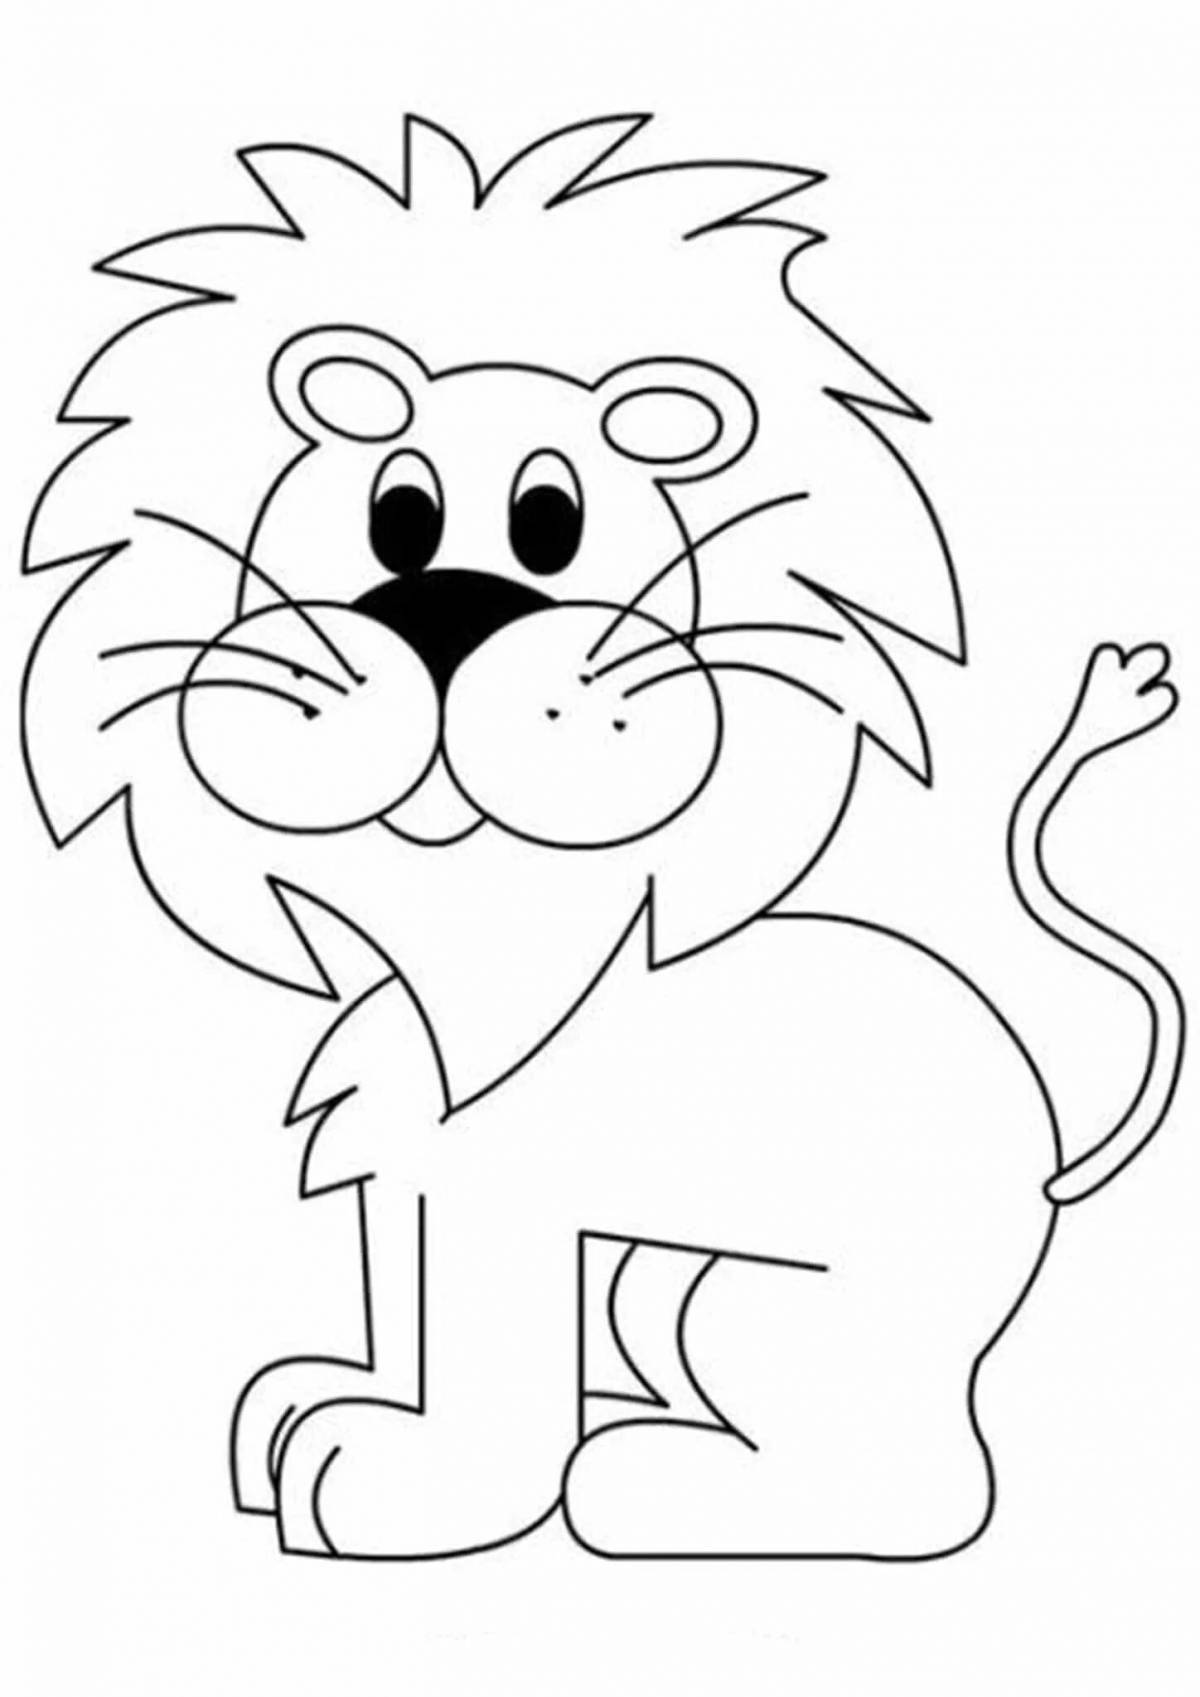 Live lion coloring for kids